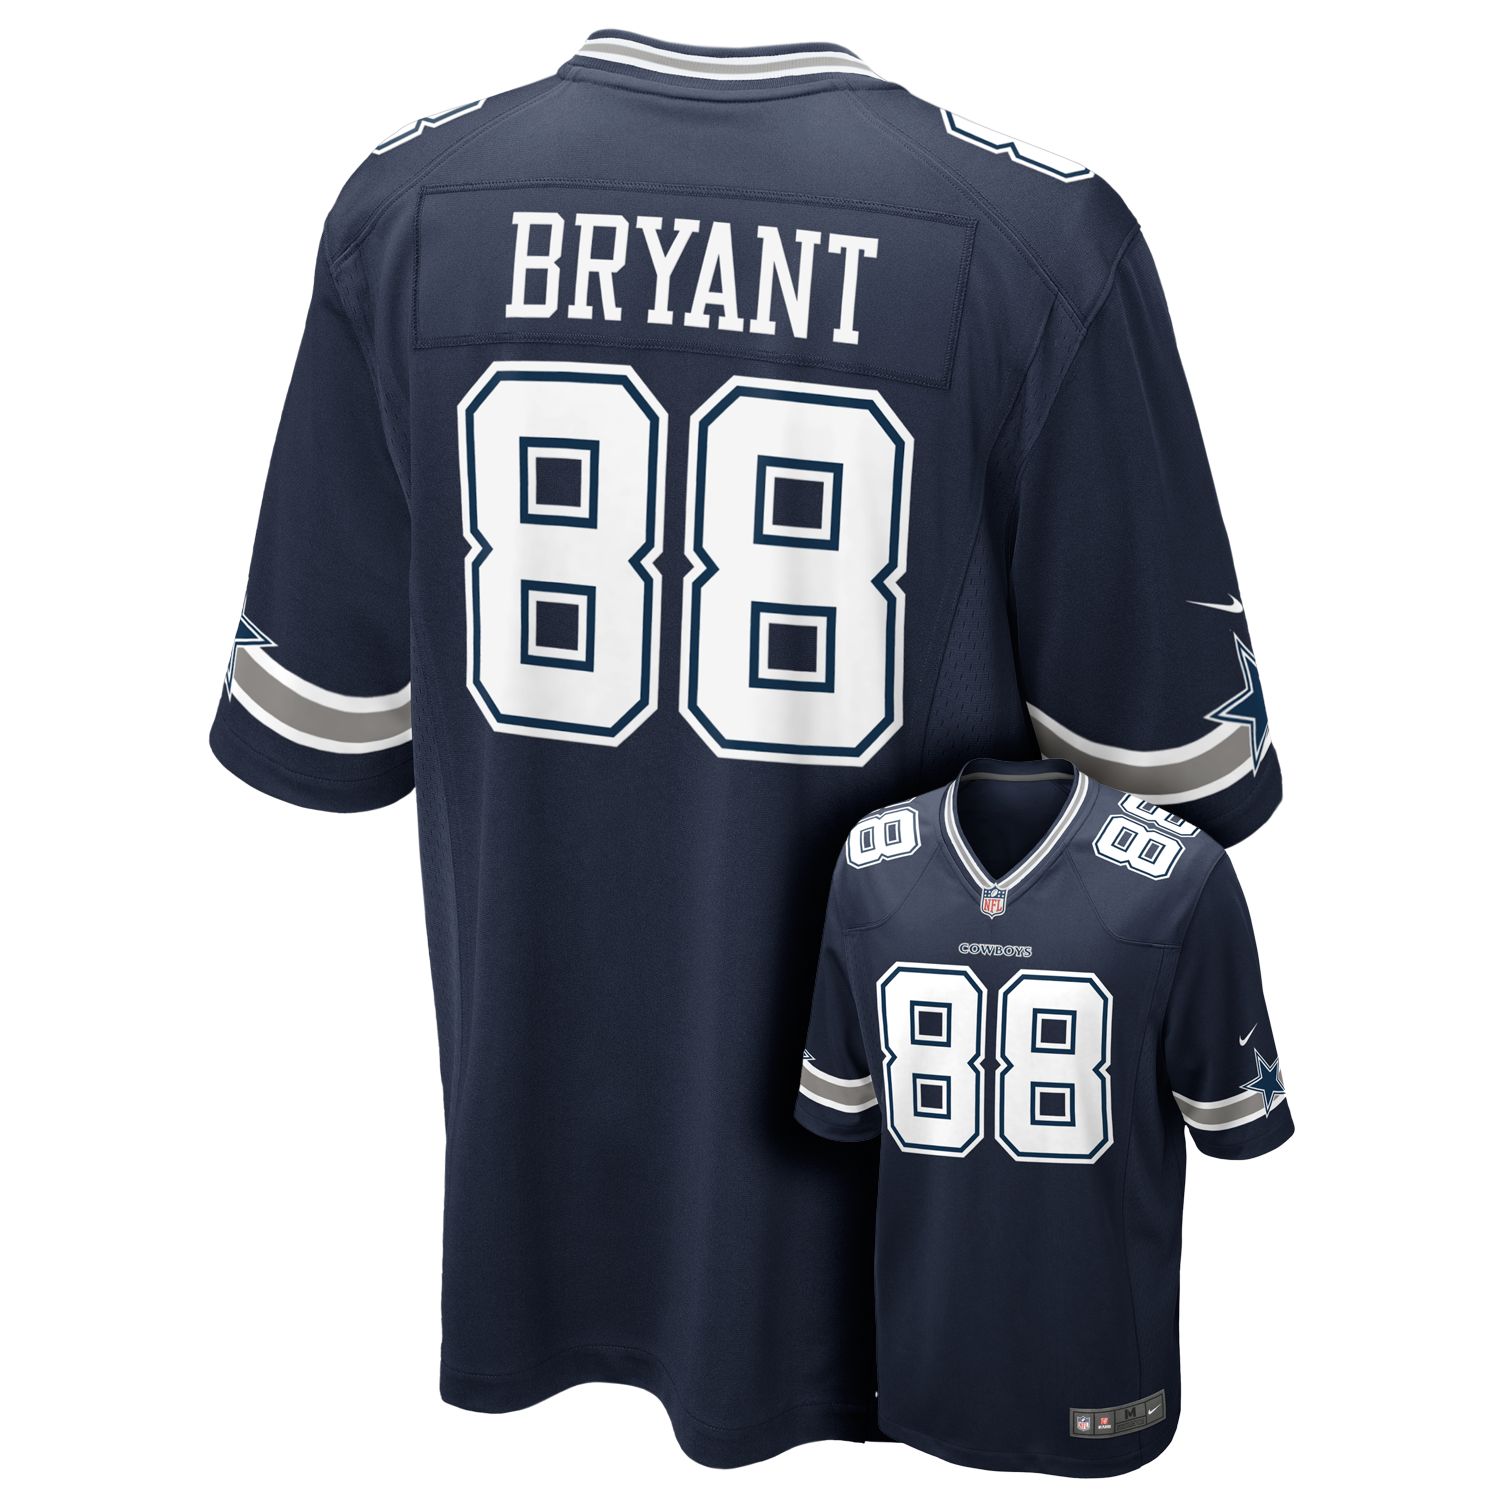 dez bryant jersey signed